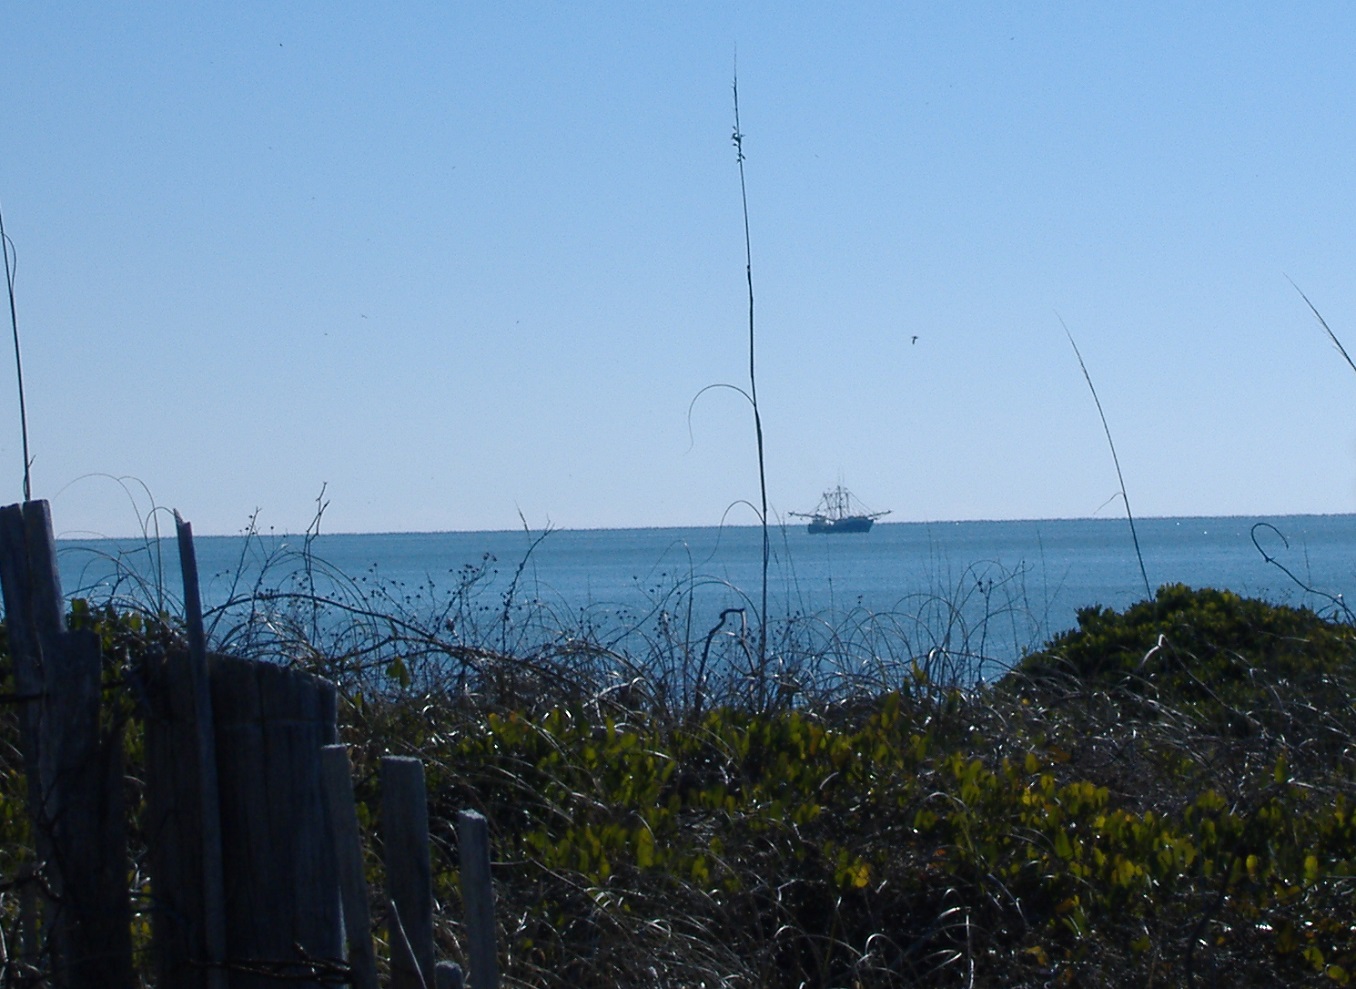 Oak Island NC picture boat on the ocean